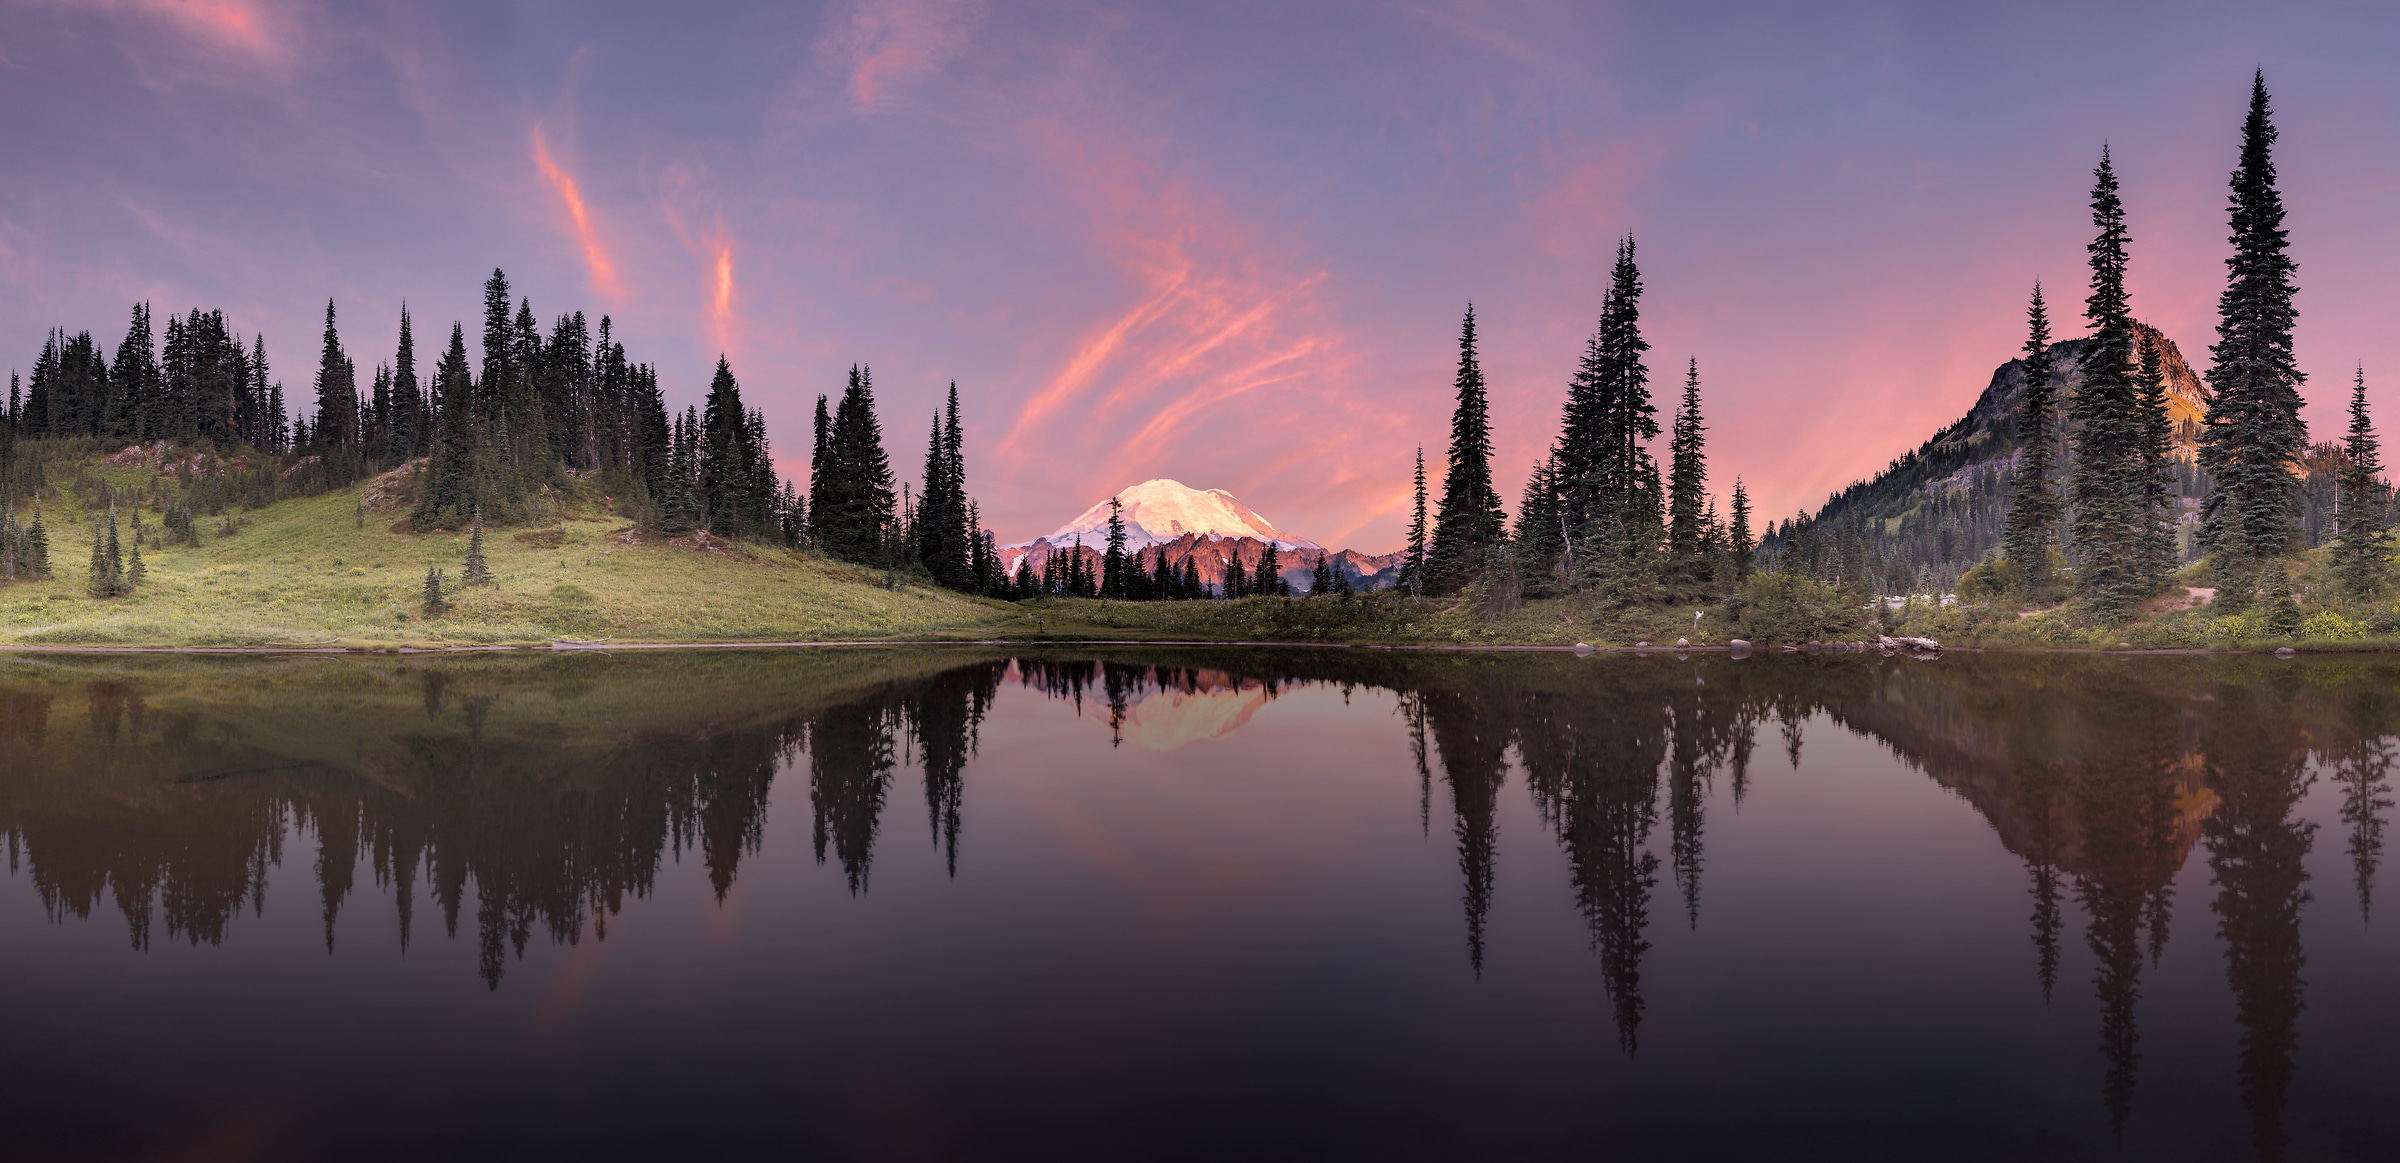 424 megapixels! A very high resolution, large-format VAST photo print of a landscape reflected in a lake; photograph created by Chris Collacott in Little Tipsoo Lake, Mount Rainier National Park, Washington.